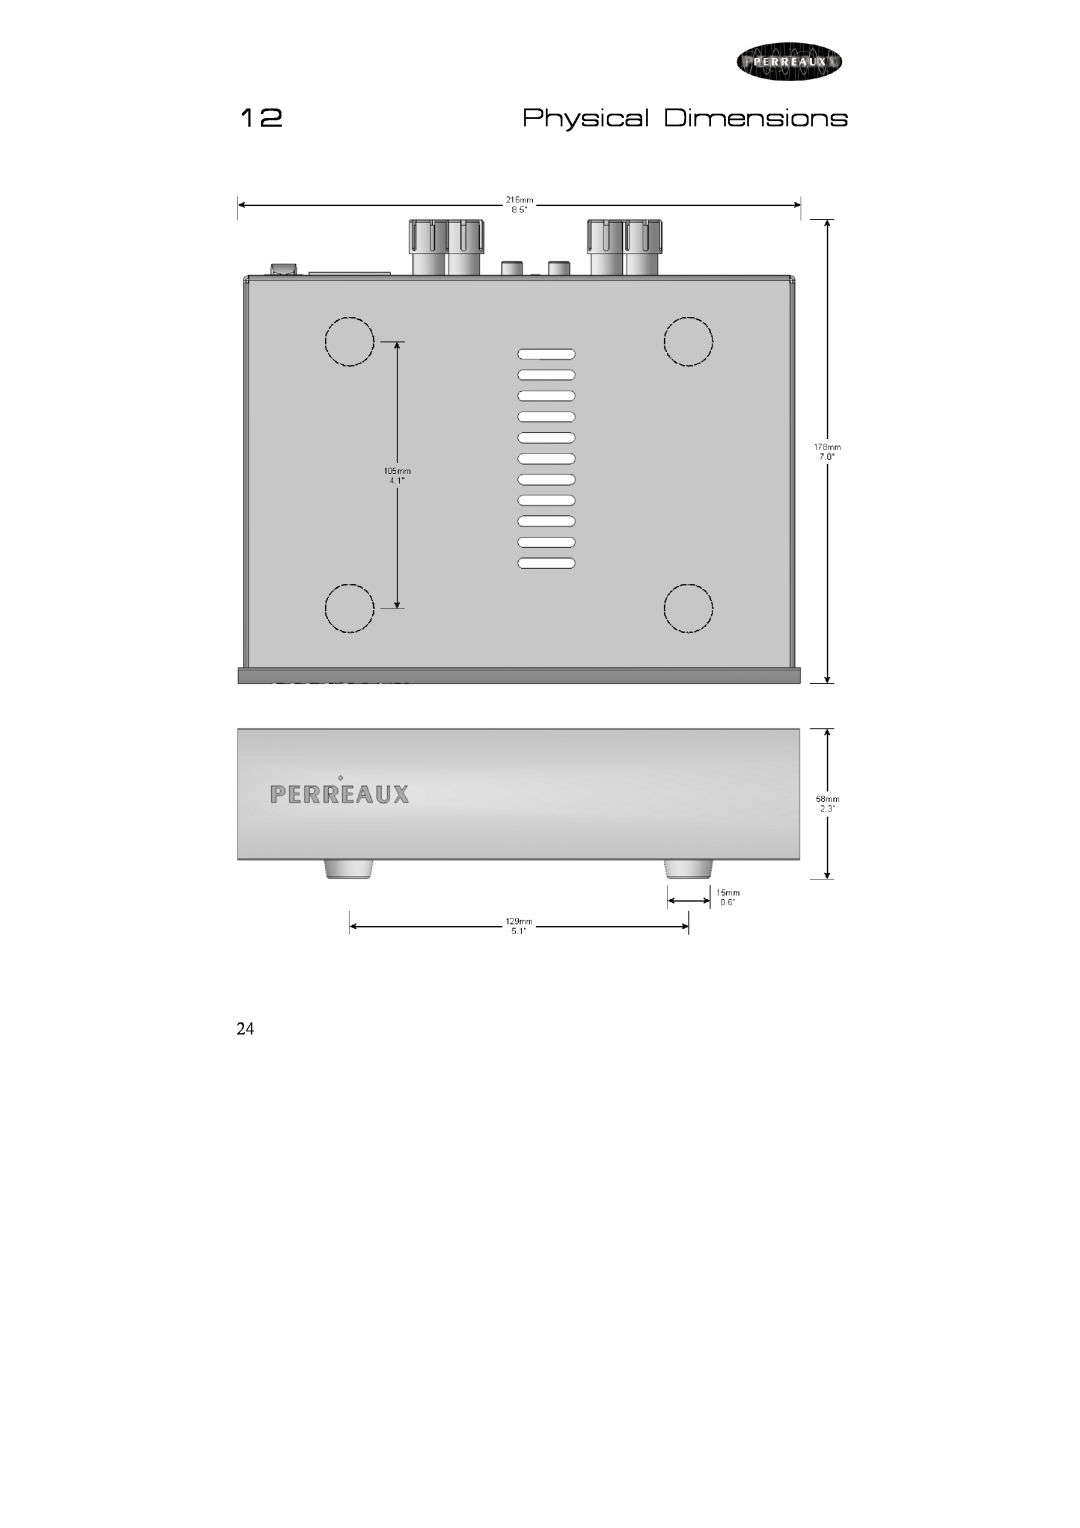 Perreaux SX25 owner manual Physical Dimensions 